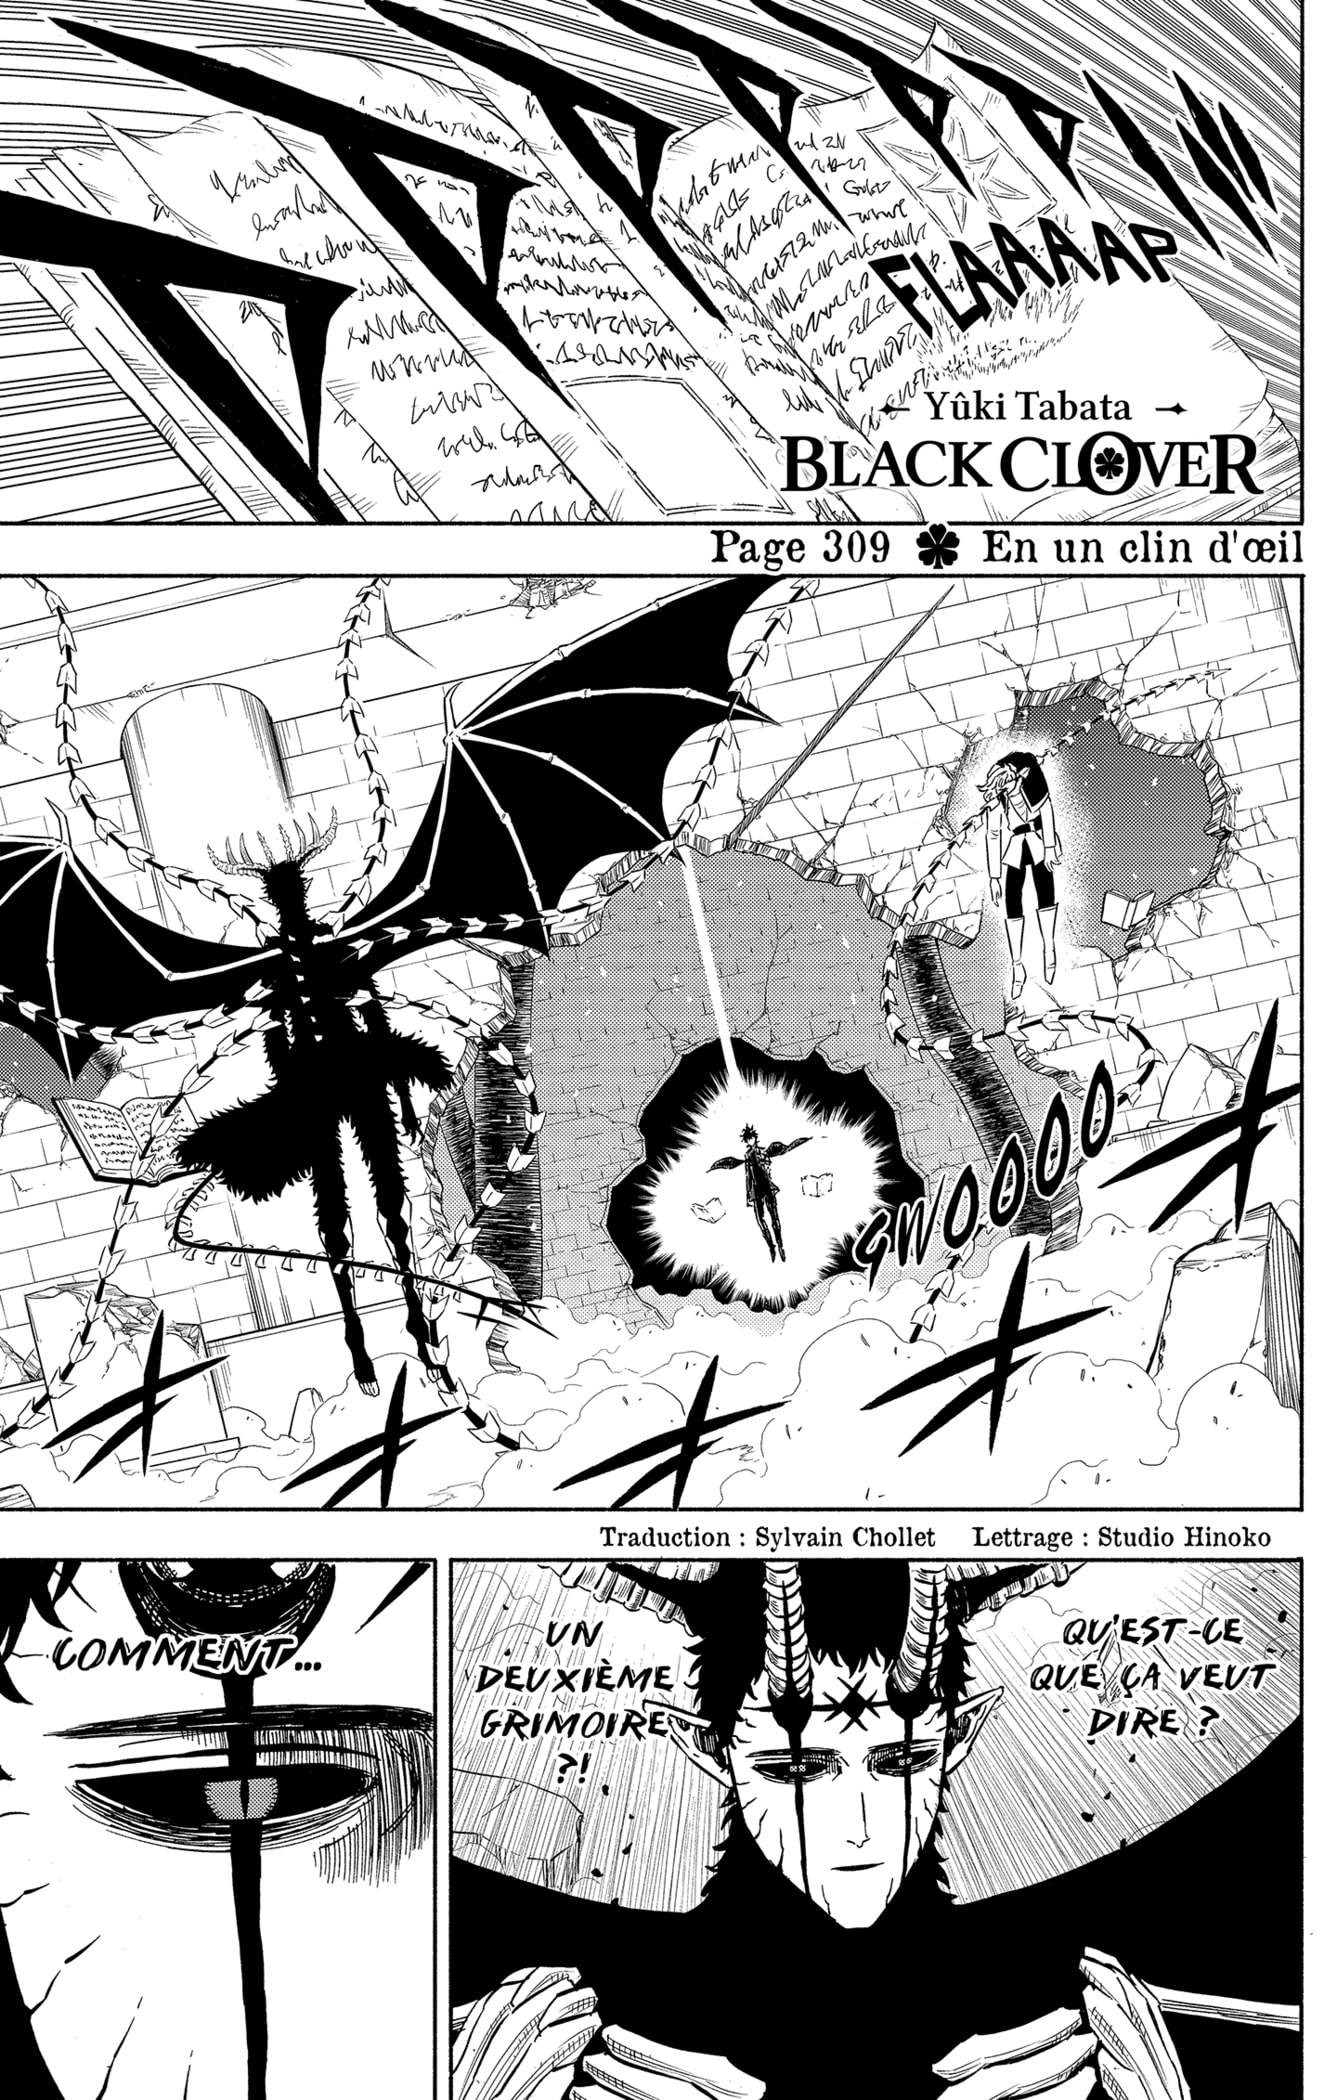 Black Clover: Chapter chapitre-309 - Page 1